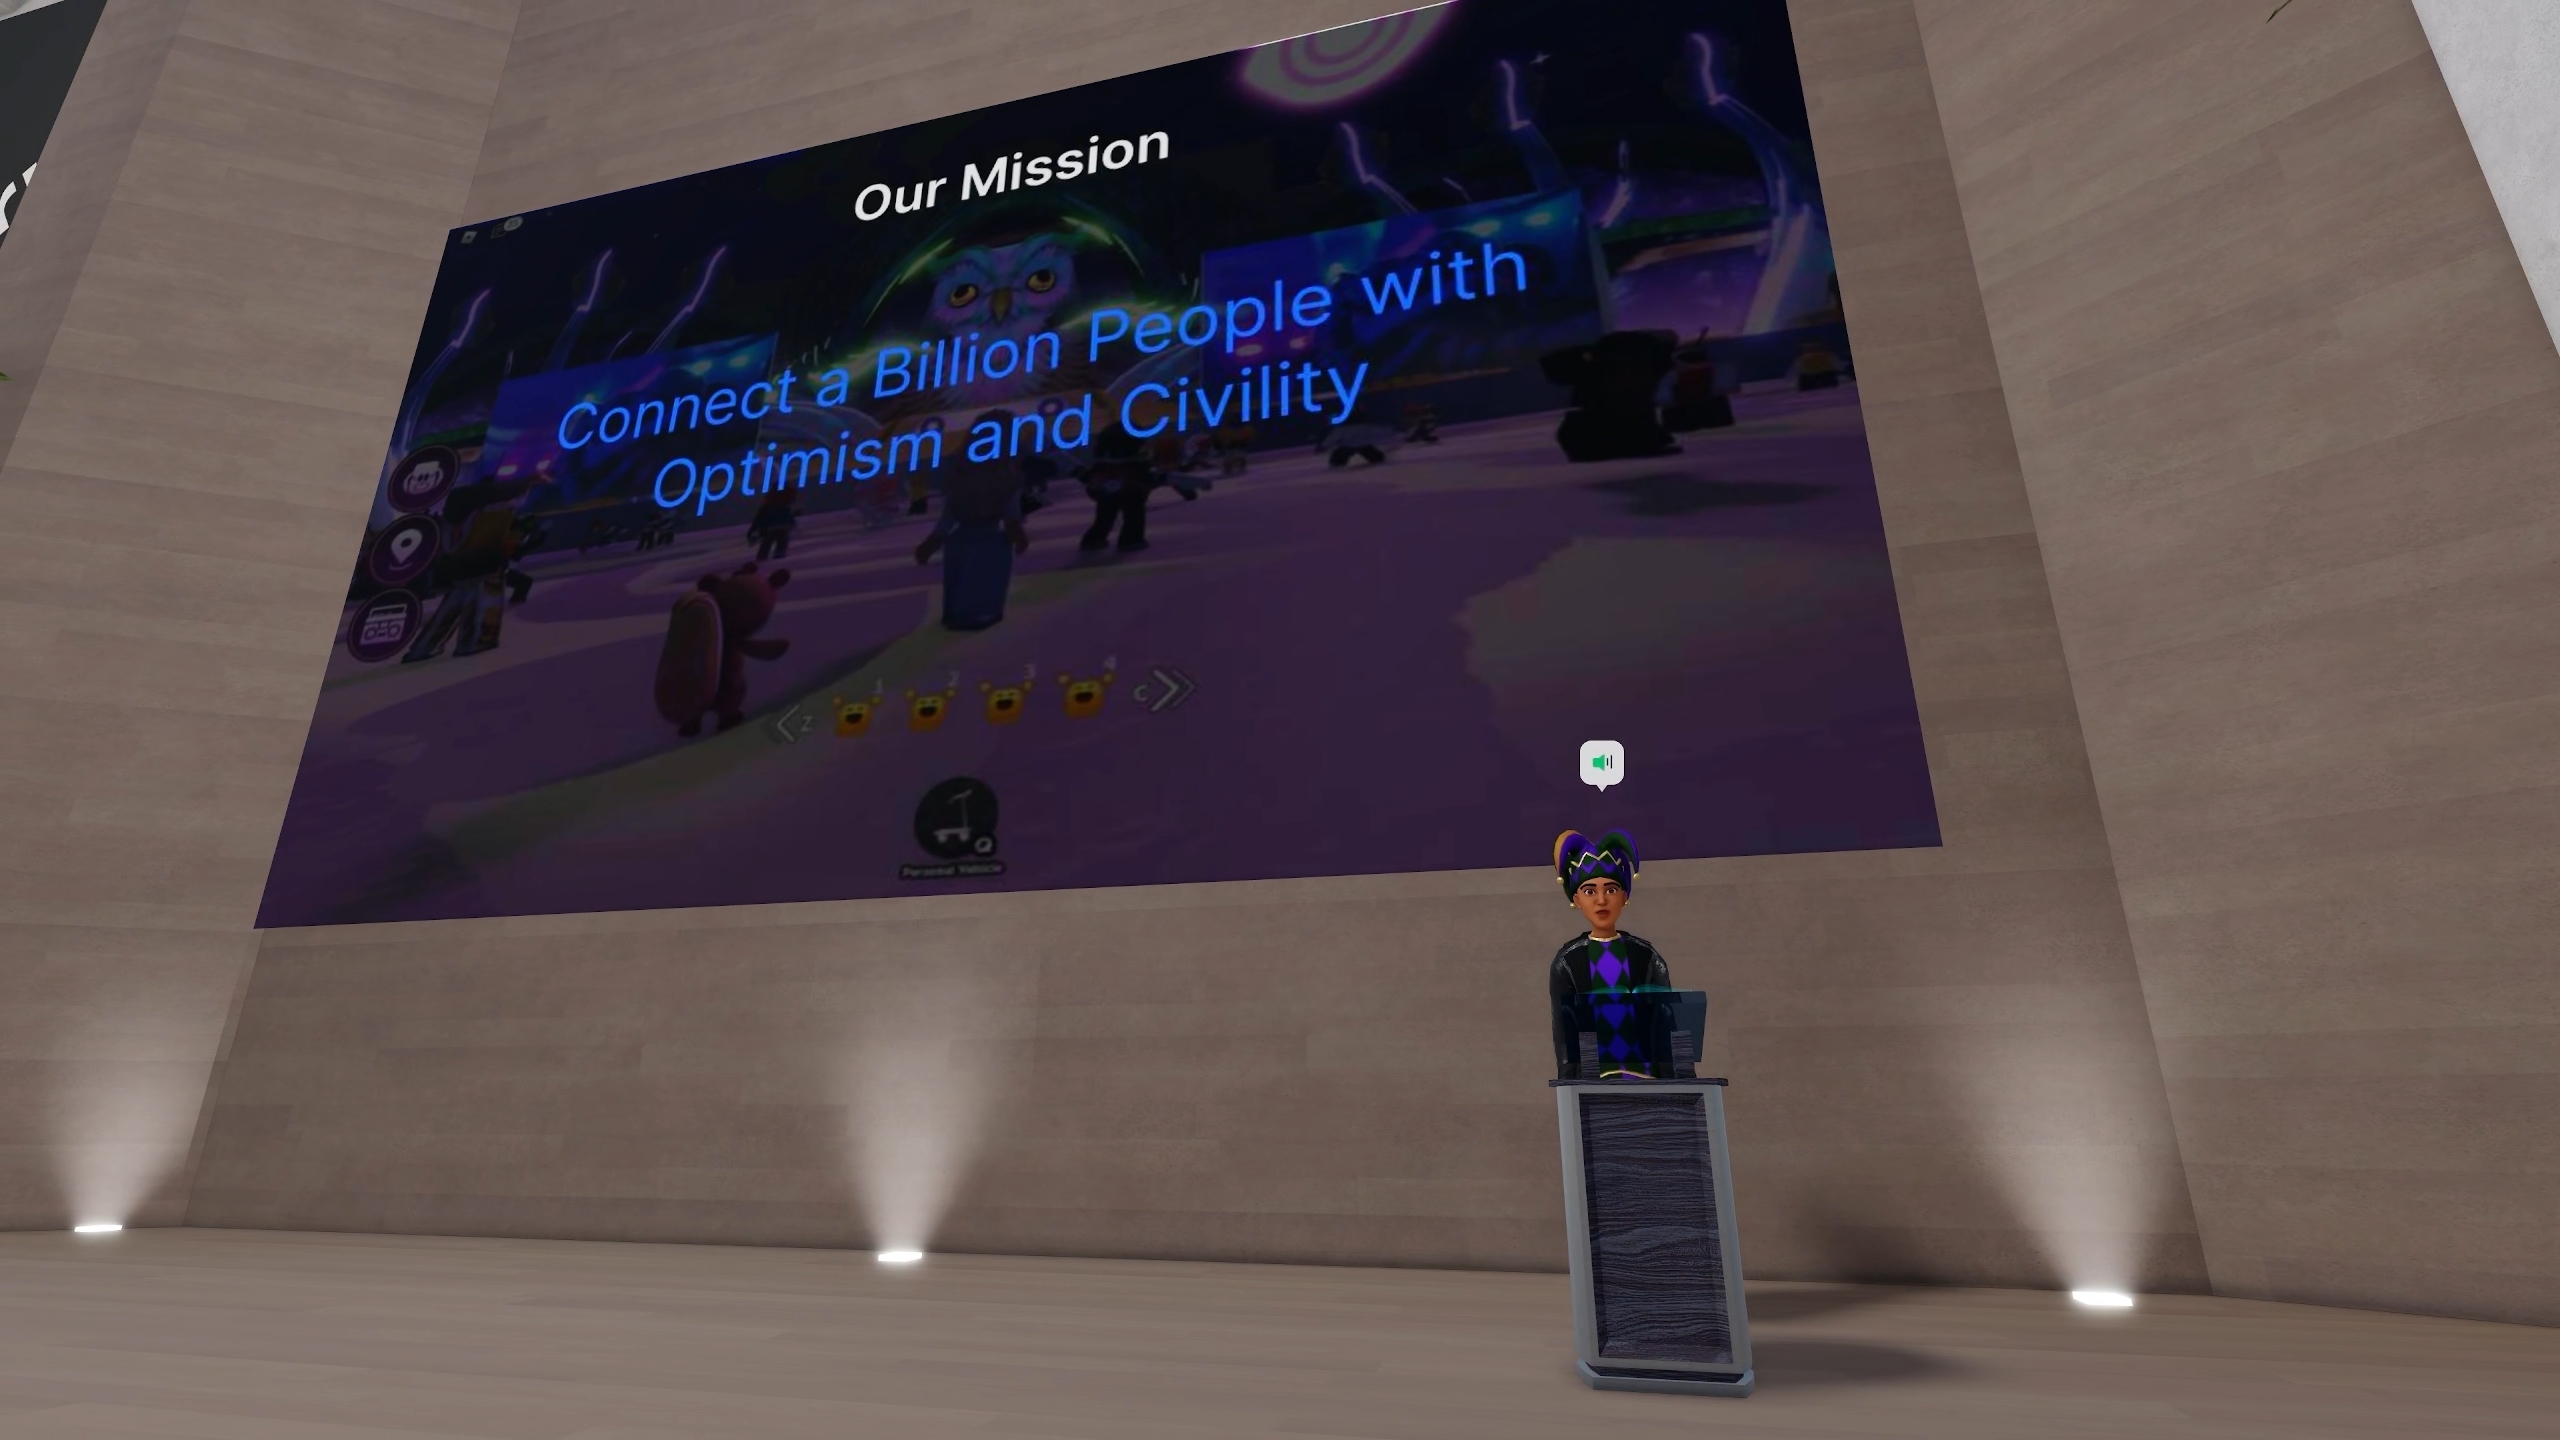 Dan Sturman talks about Roblox's mission and vision in the Roblox Career Center 